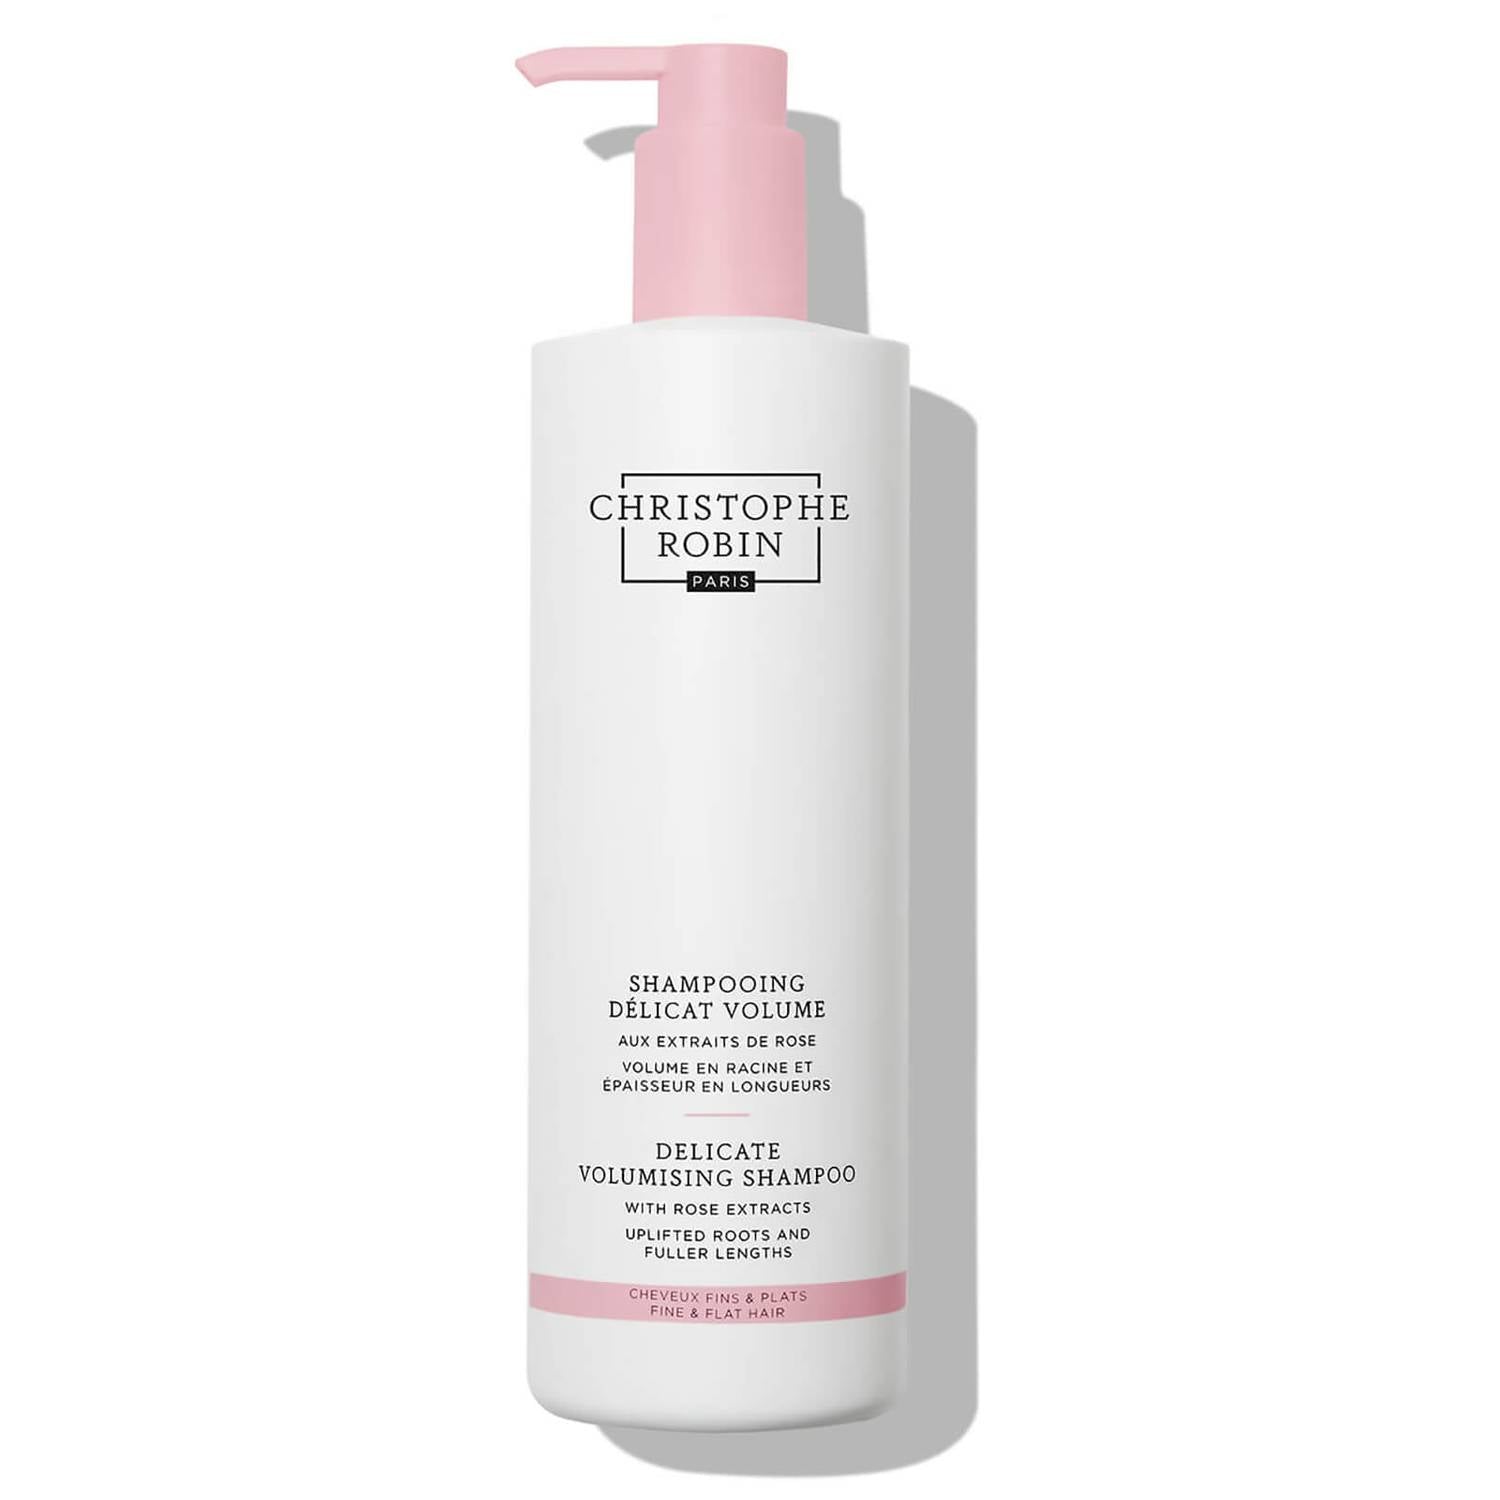 Christophe Robin Delicate Volumizing Shampoo with Rose Extracts 500ml